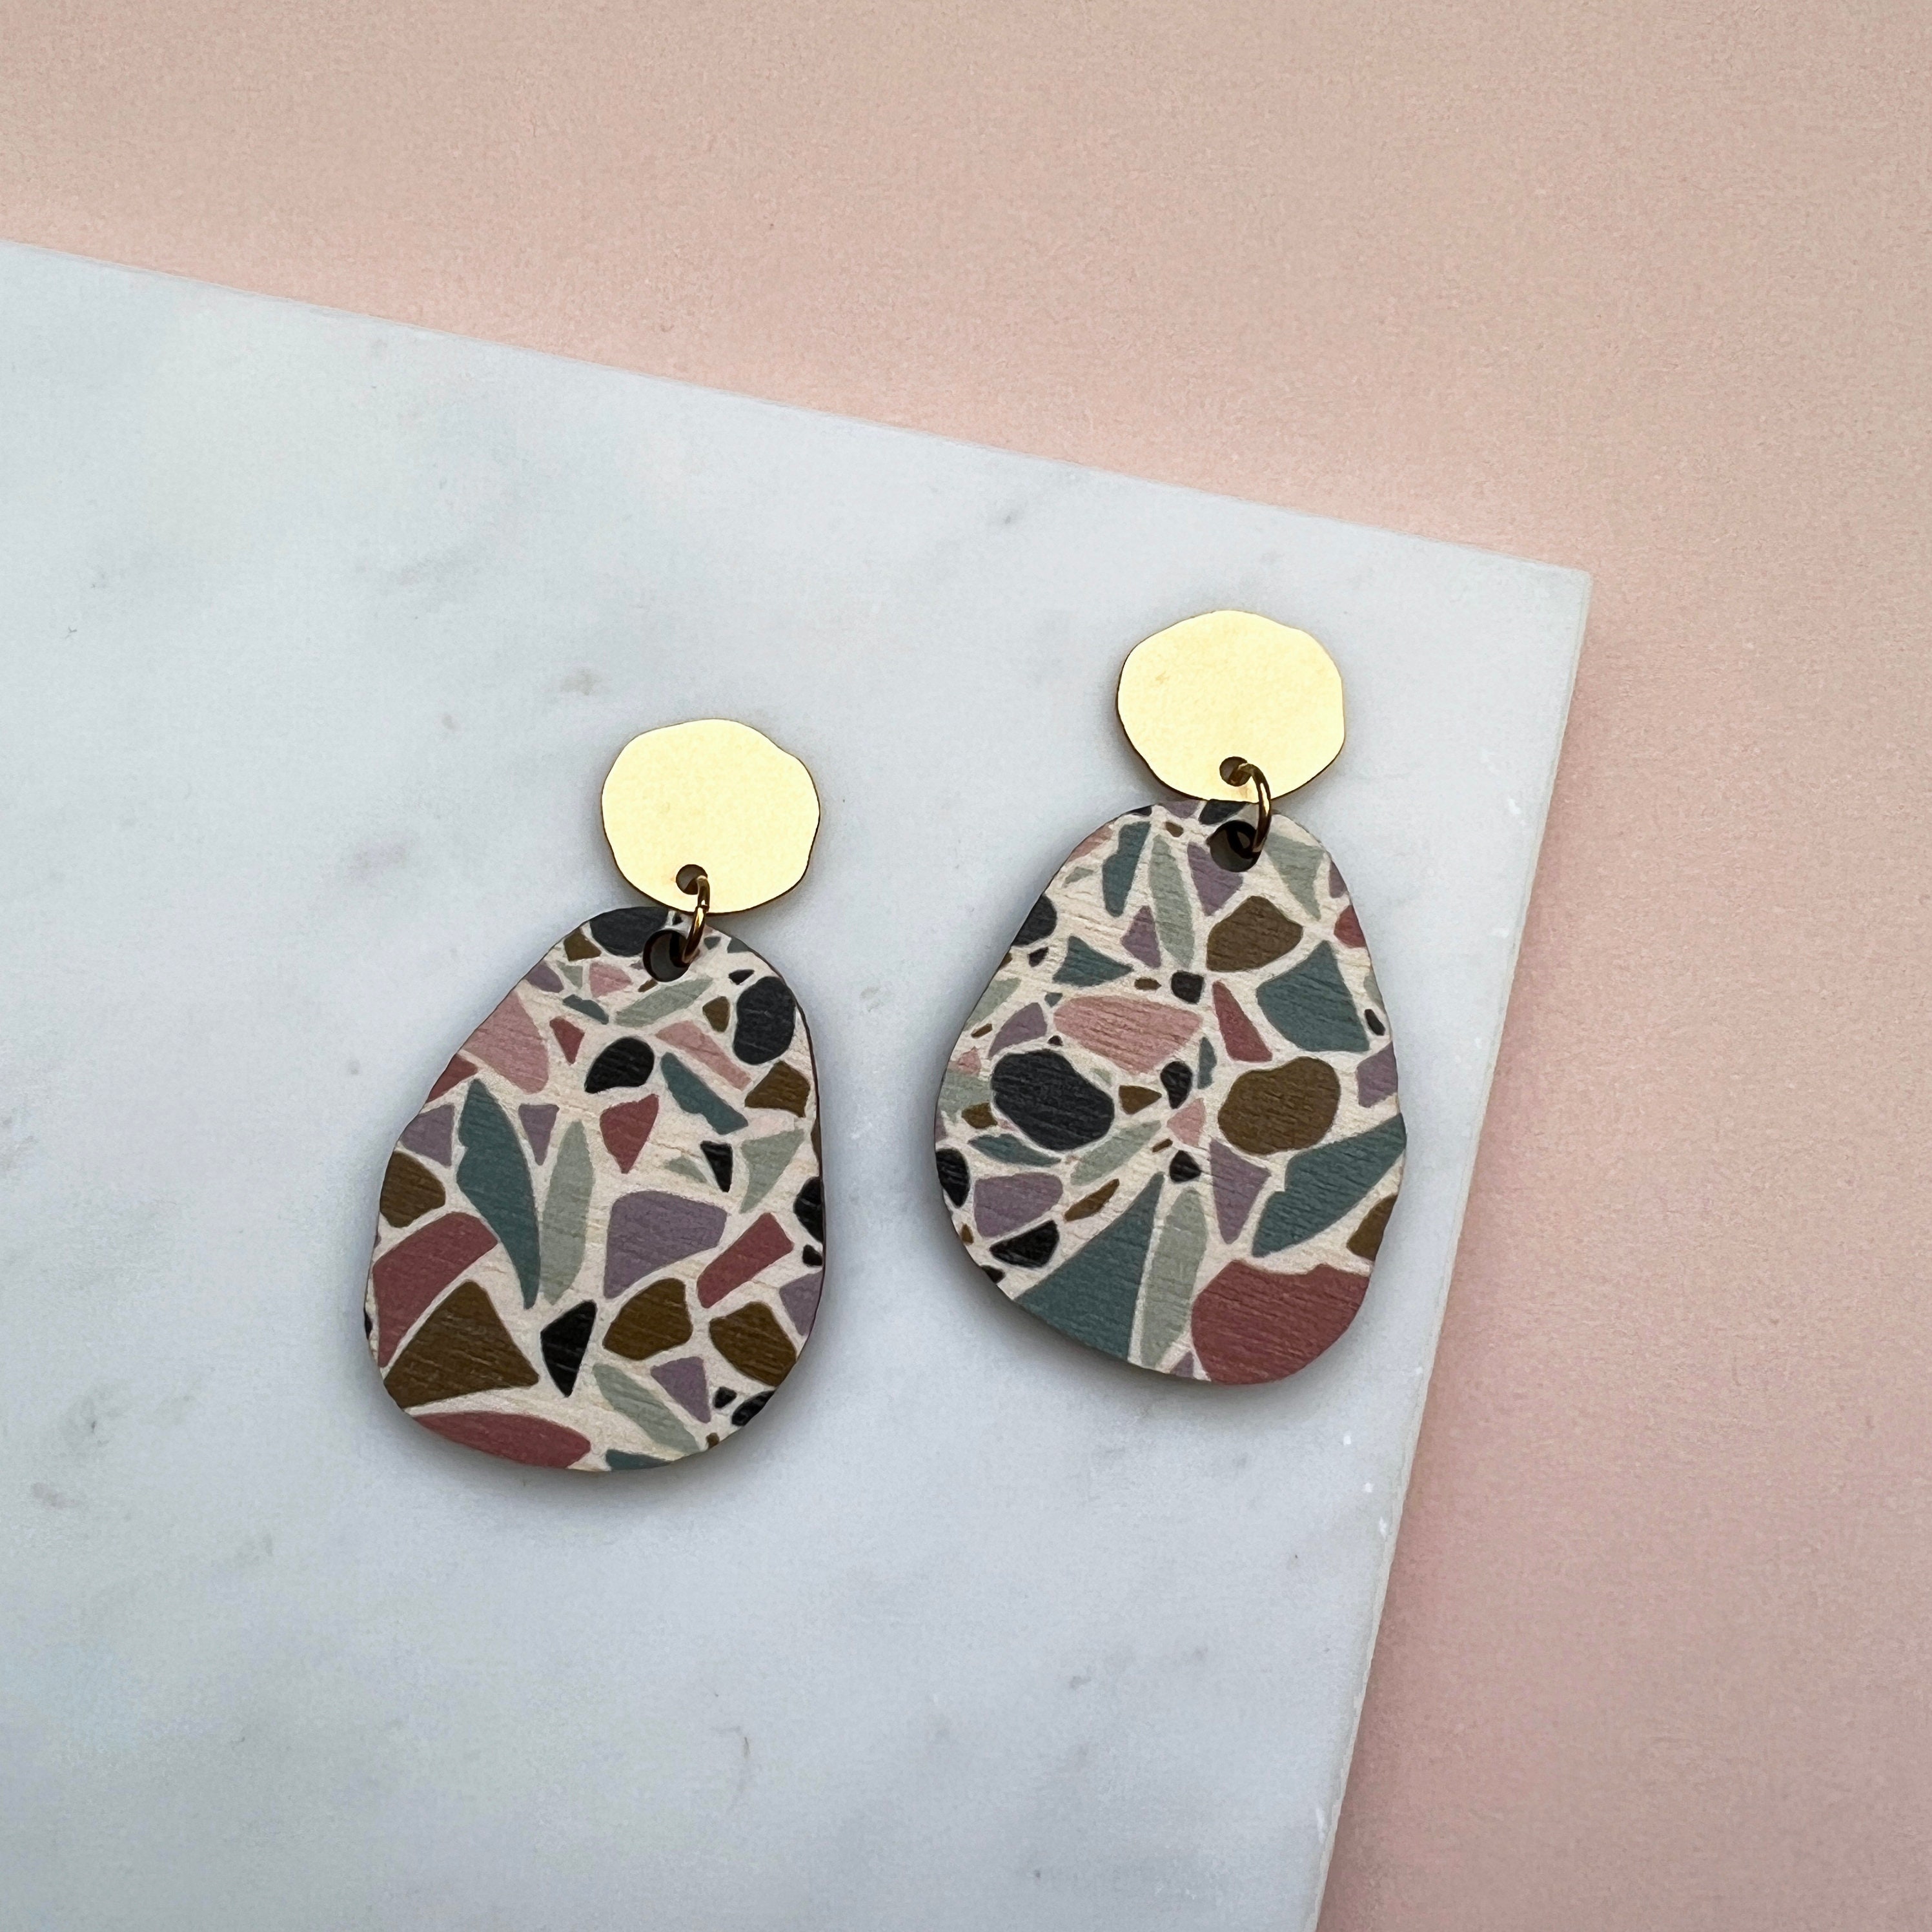 Statement Drop Pebble Studs - Terrazzo Geometric Earrings Gifts For Her Party